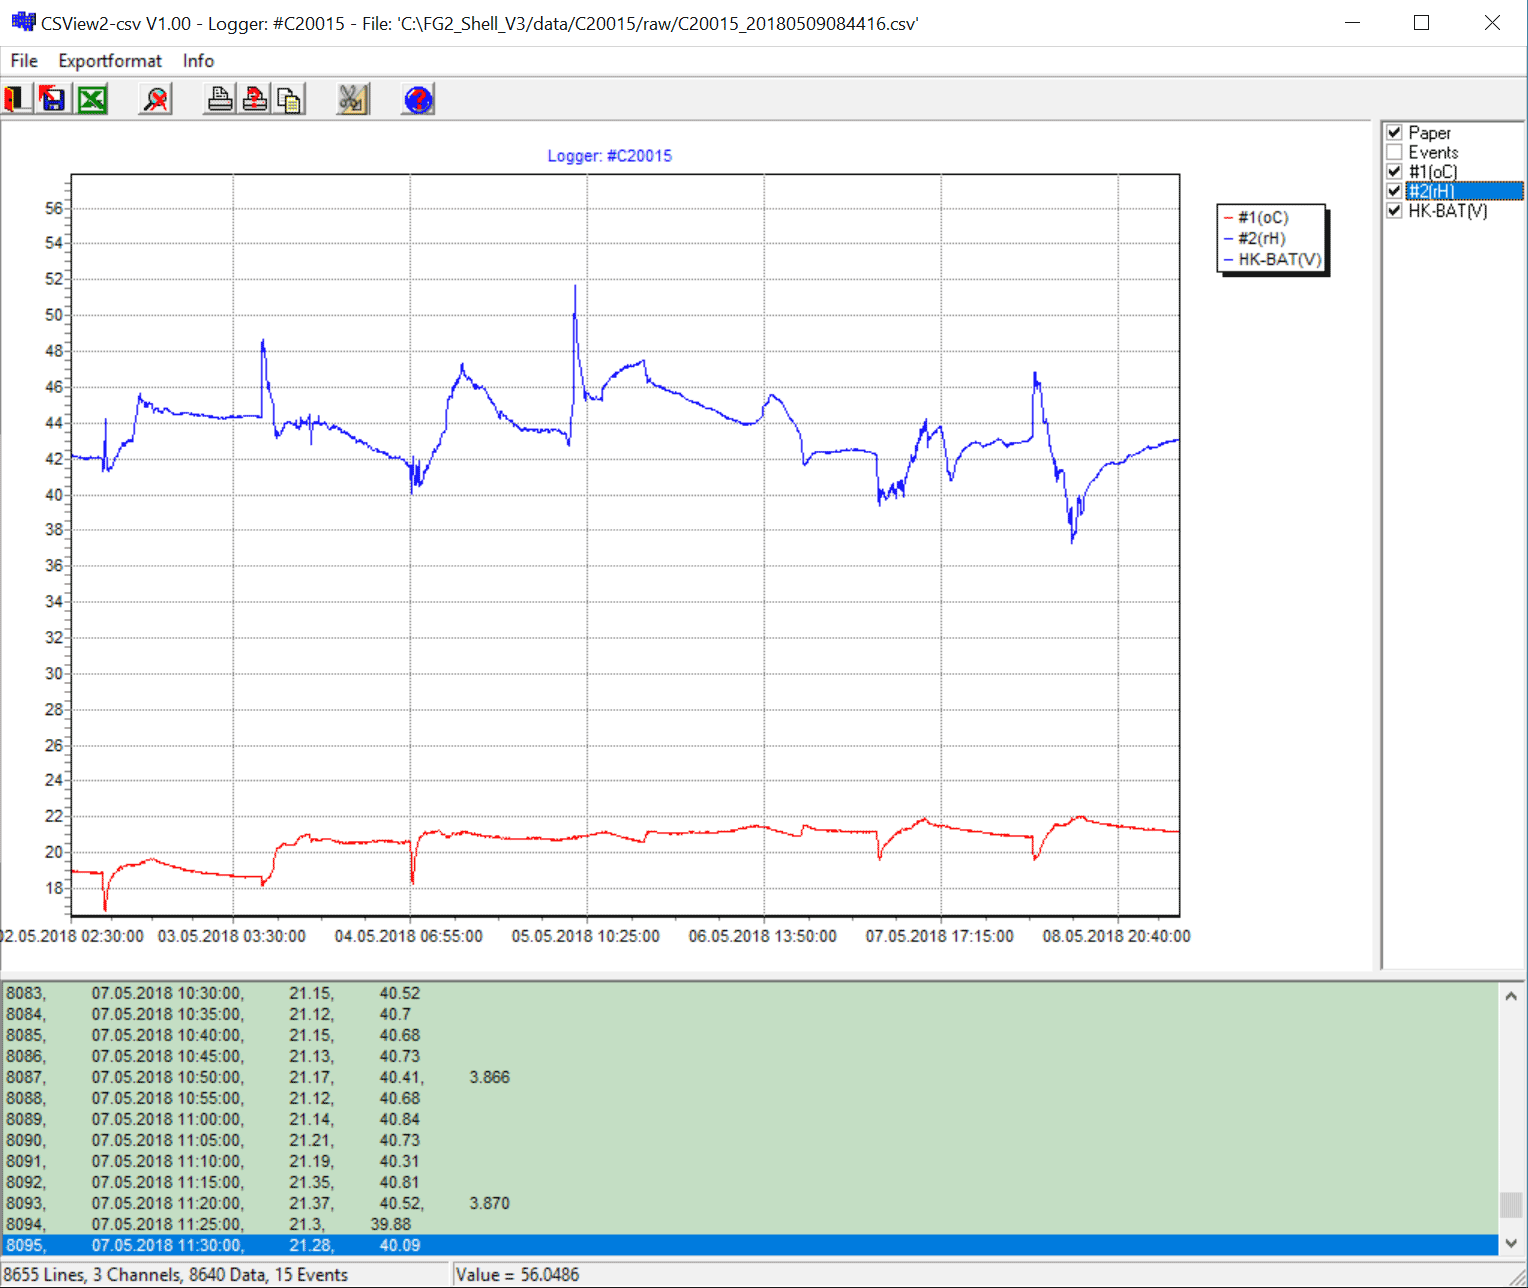 CSView, a graphical viewer